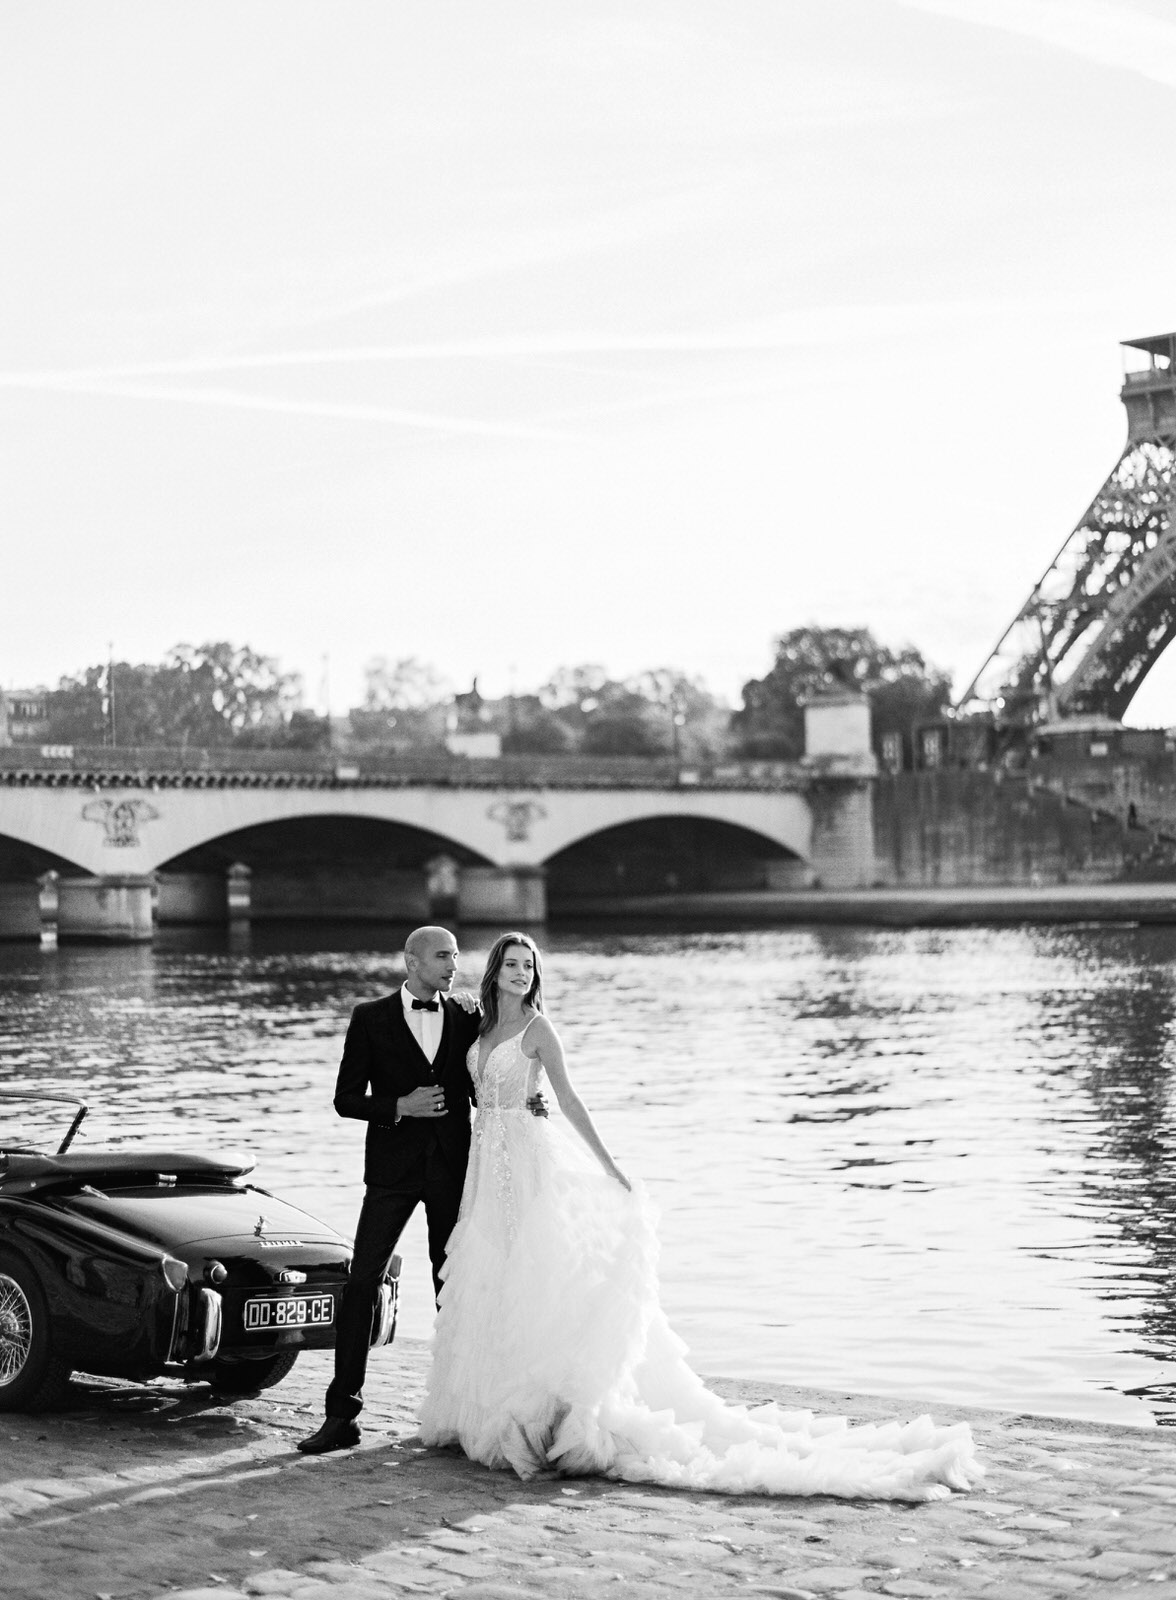 Chic film wedding photography of a French couple during their destination wedding in Paris, France.